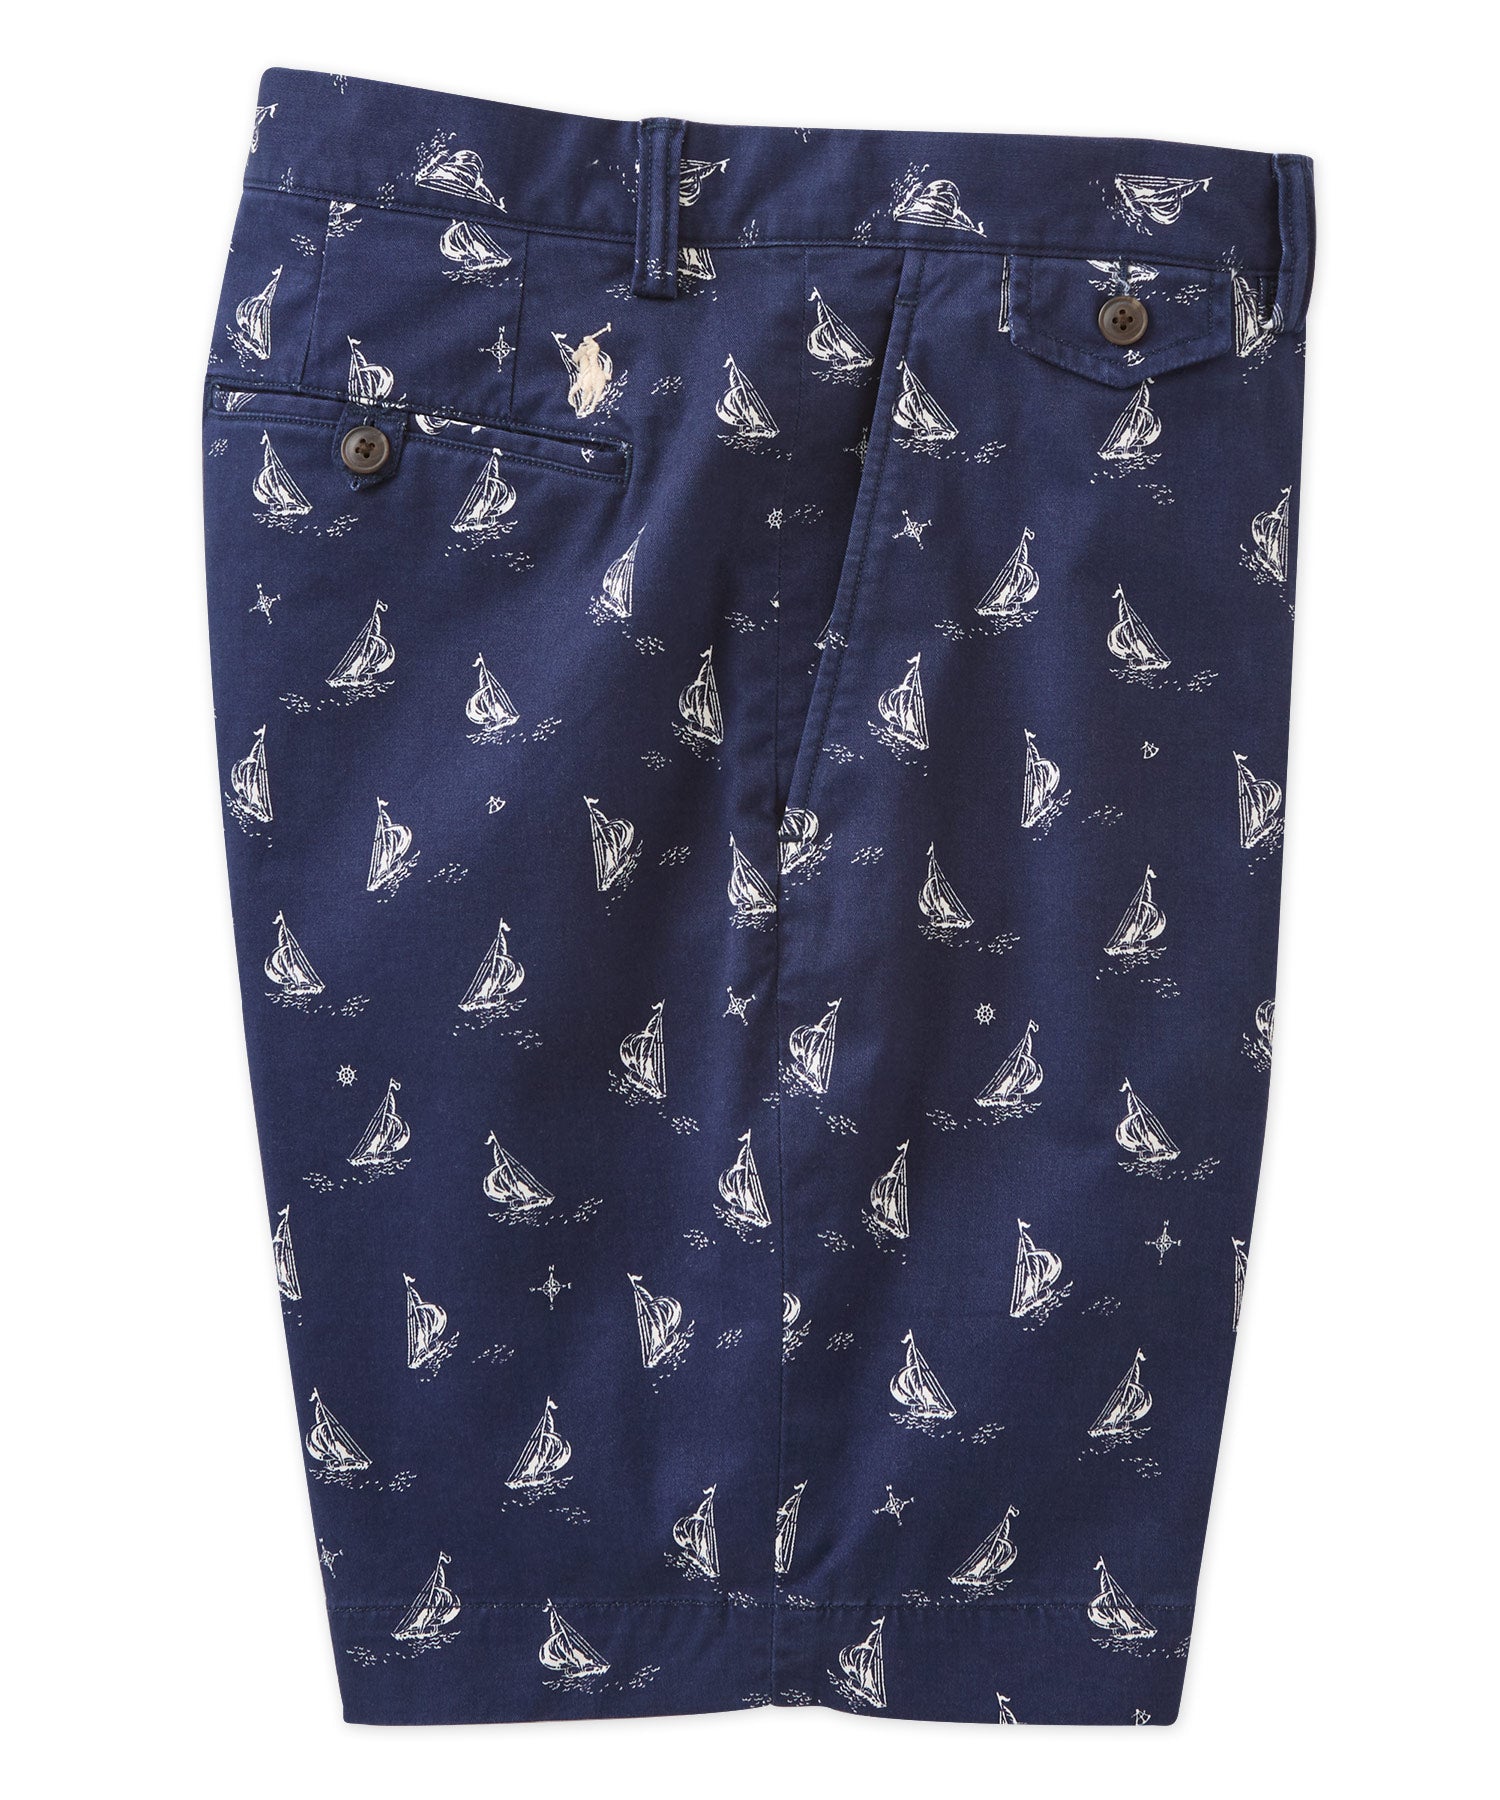 Polo Ralph Lauren Patterned Stretch Chino Short